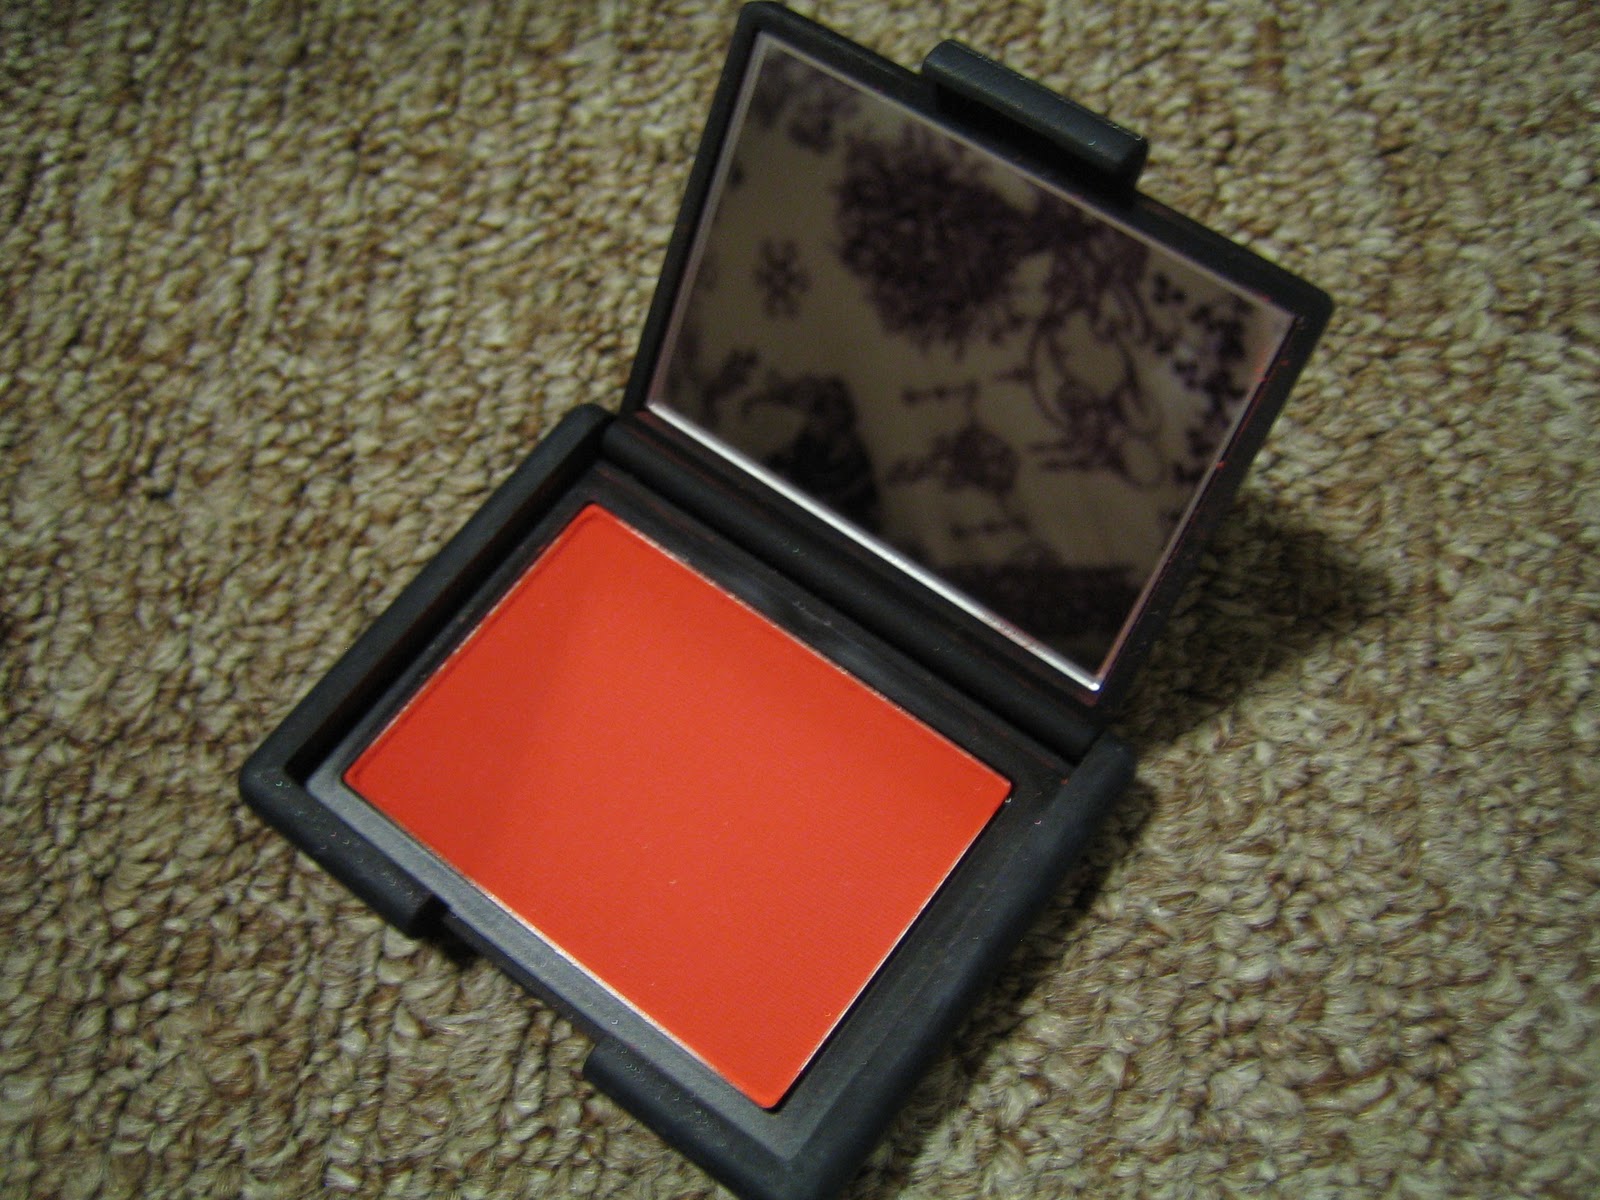 Bower of Blisse: NARS Blush in Exhibit A